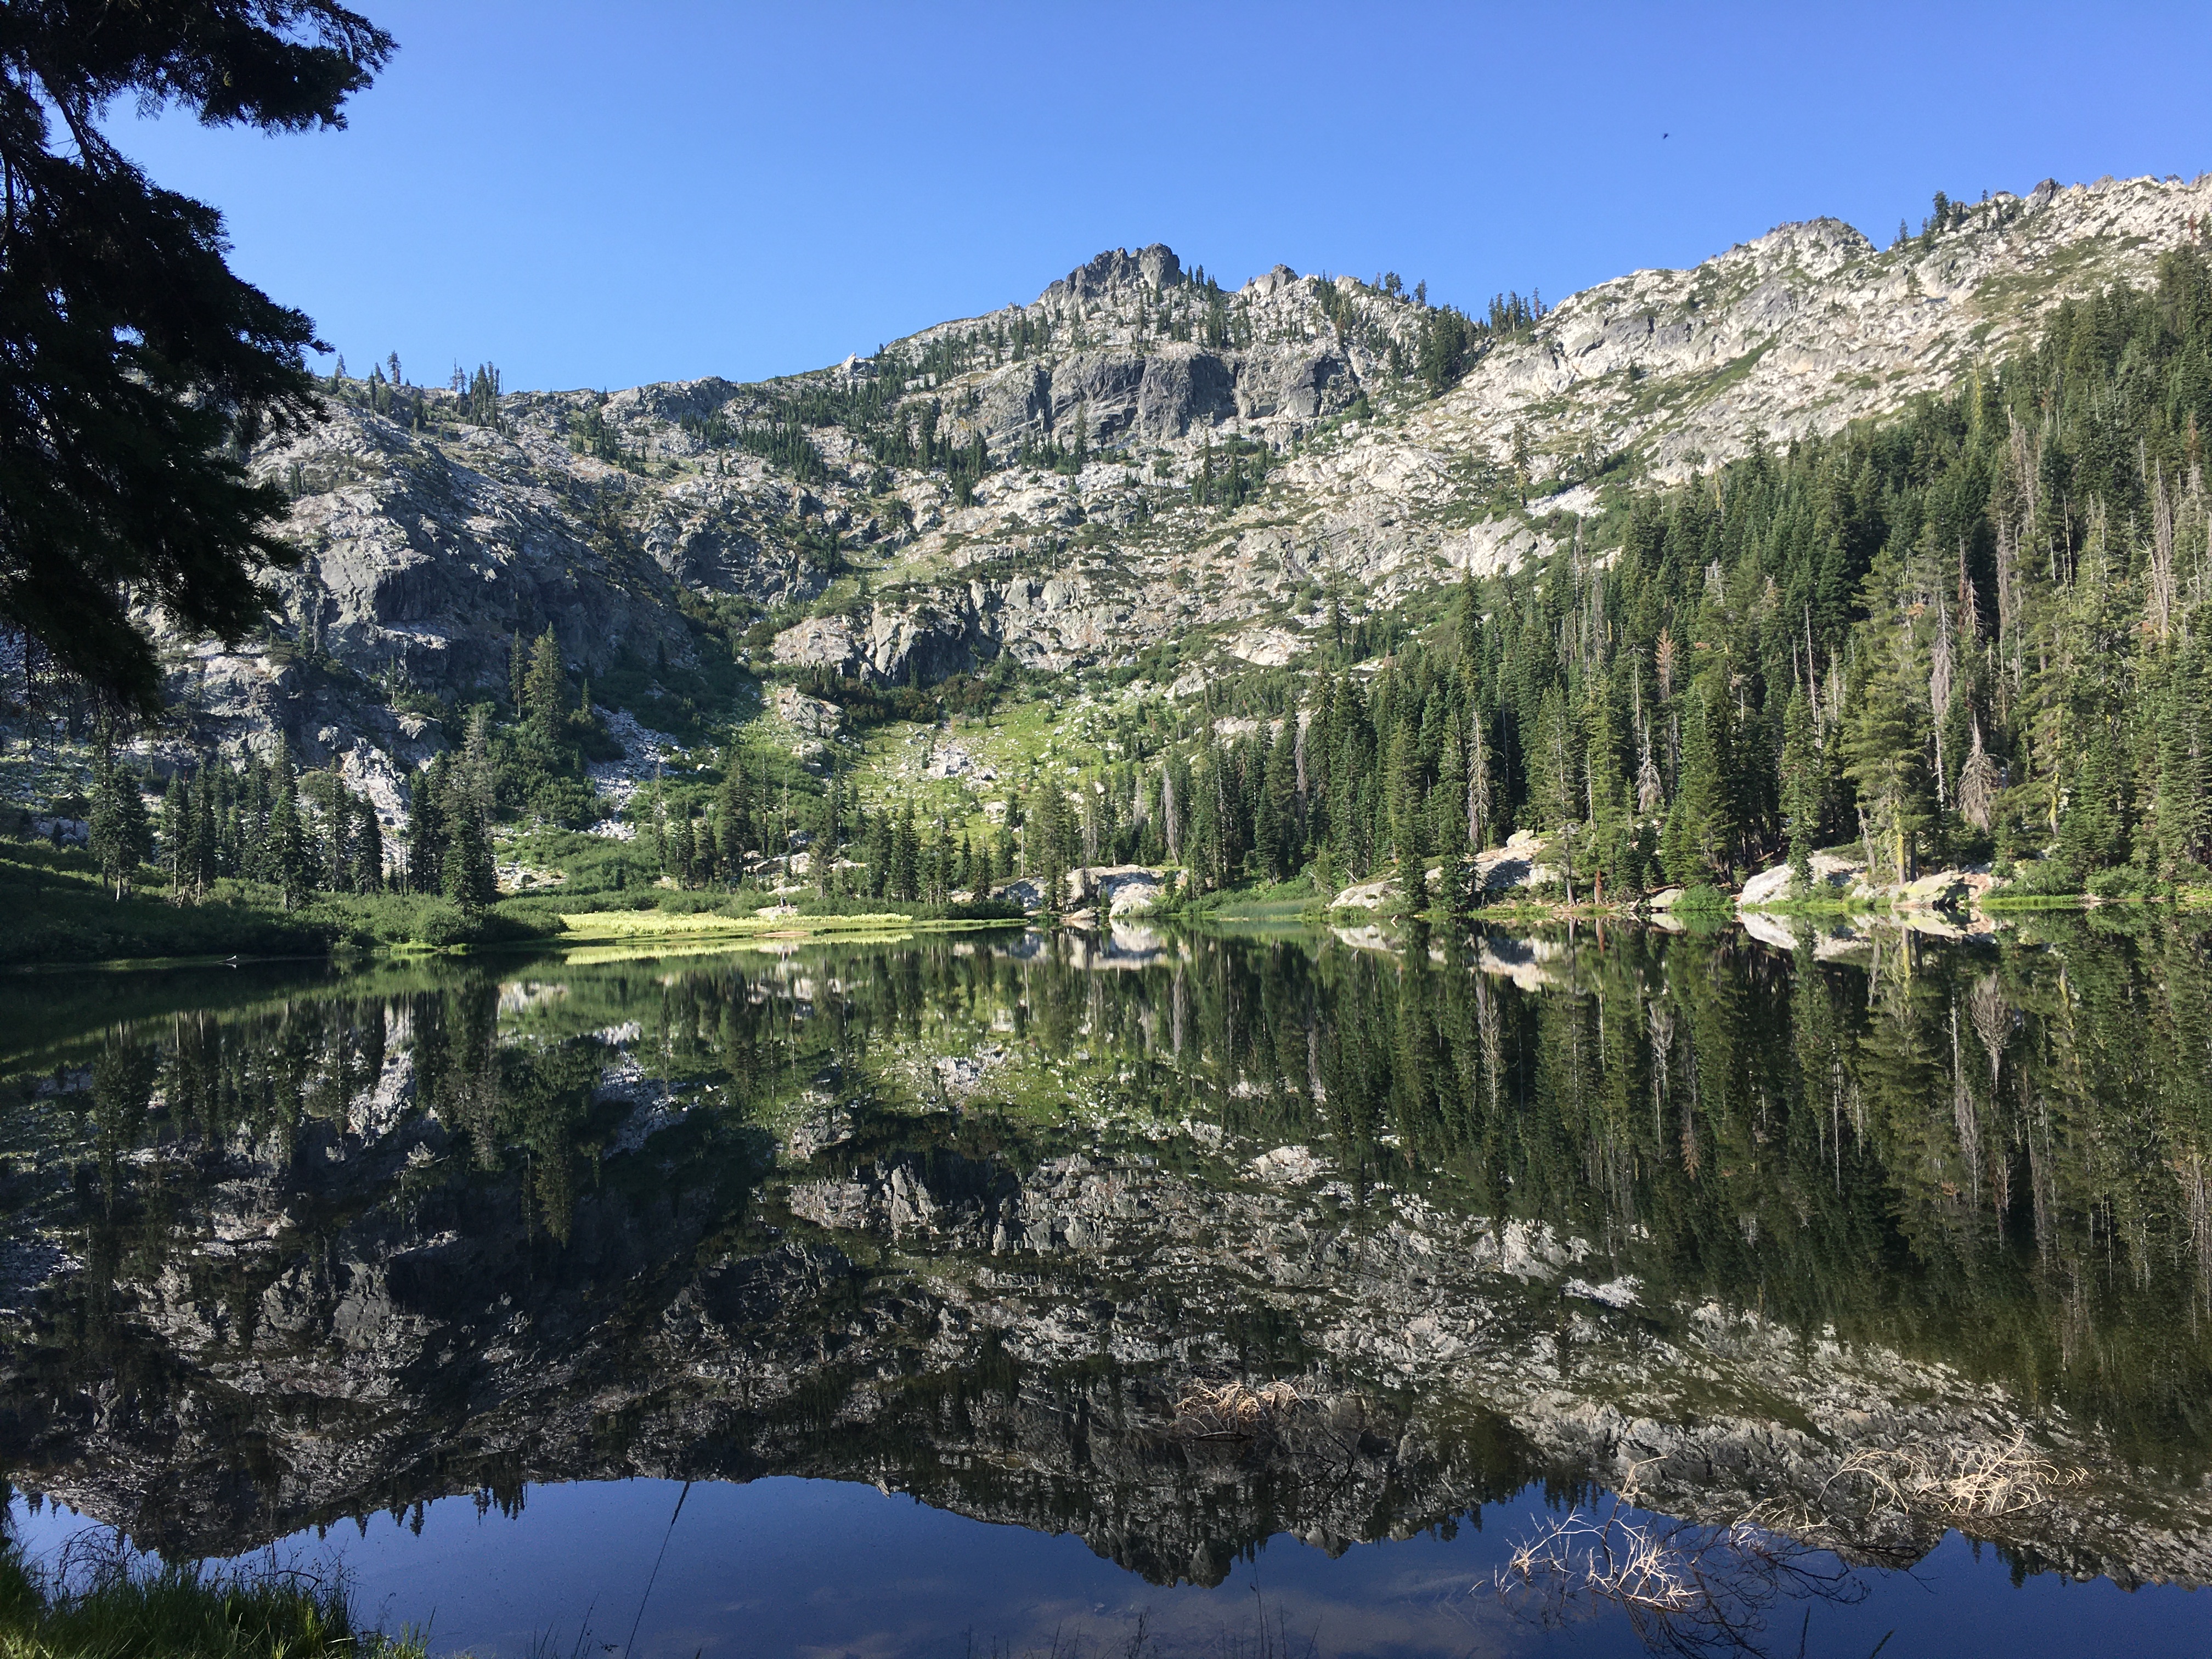 Tangle Blue Lake in the Trinity Alps Wilderness is an alpine lake surrounded by granite cliffs and conifer trees.